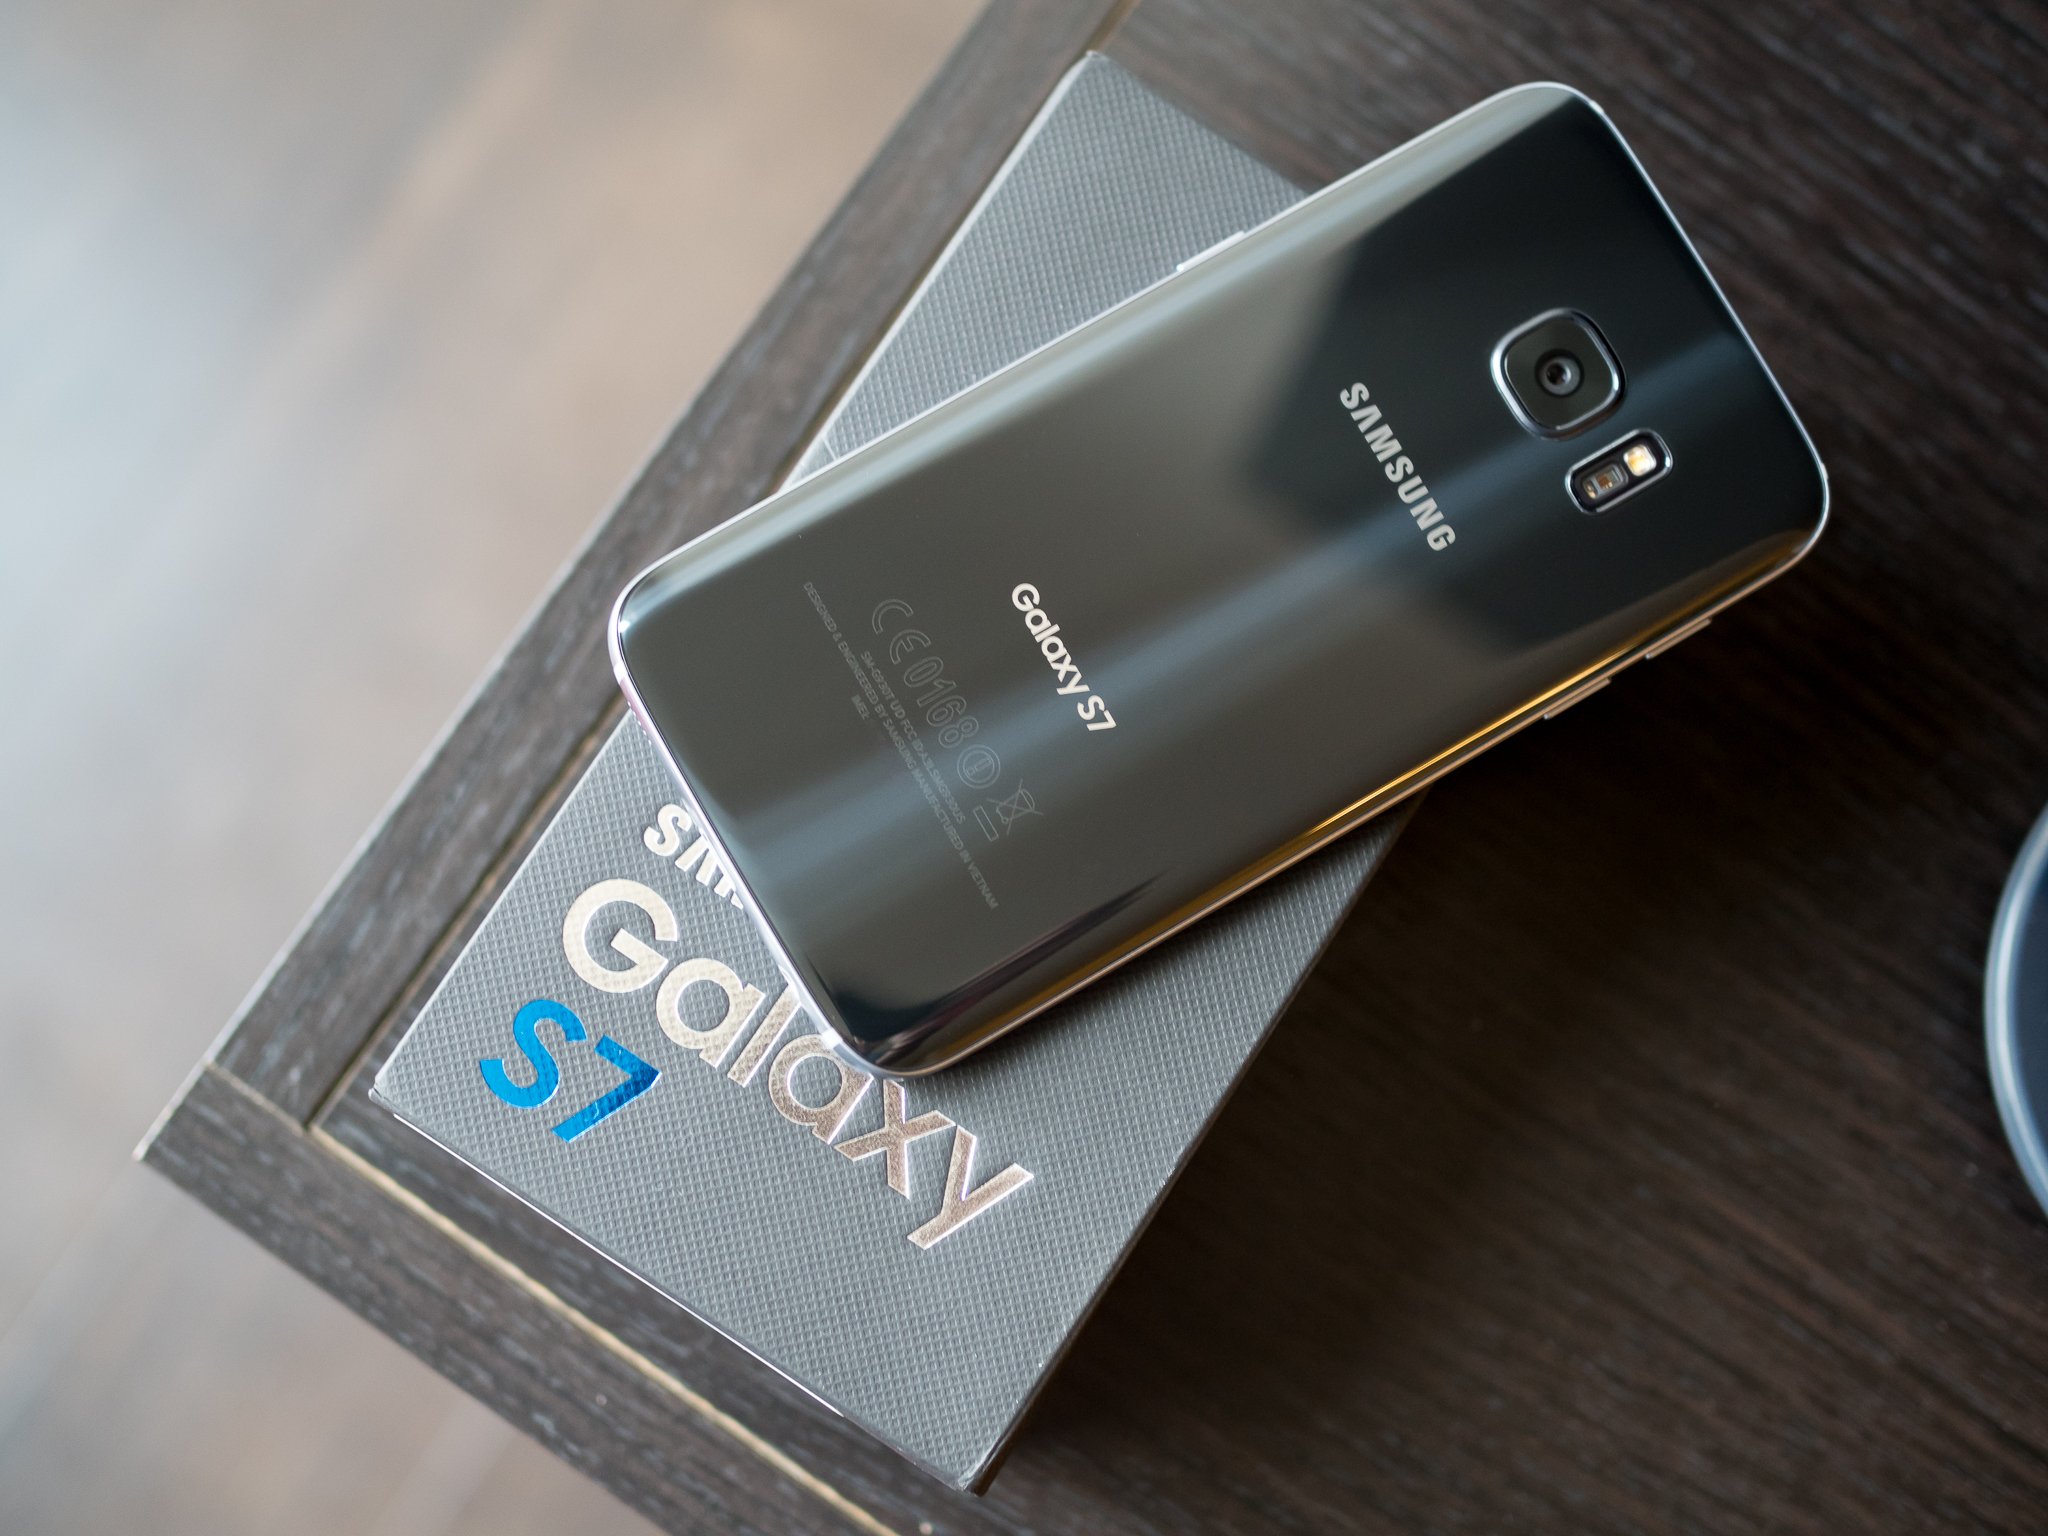 Samsung galaxy s6   android forums at androidcentral.com